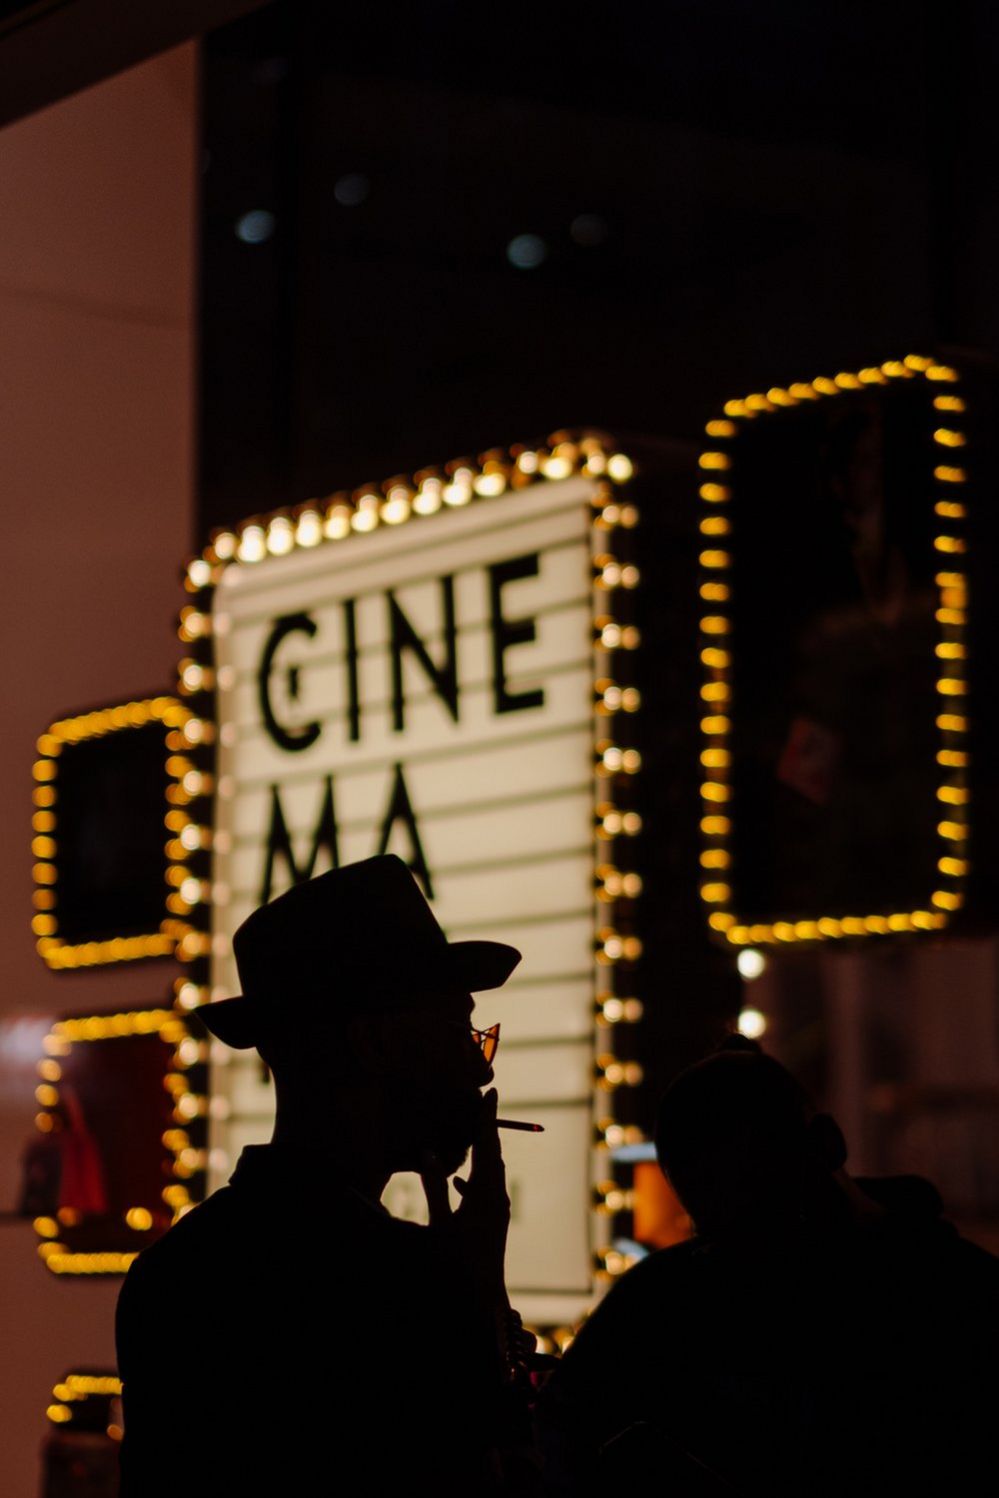 Silhouette of a person holding a cigarette in front of a cinema sign